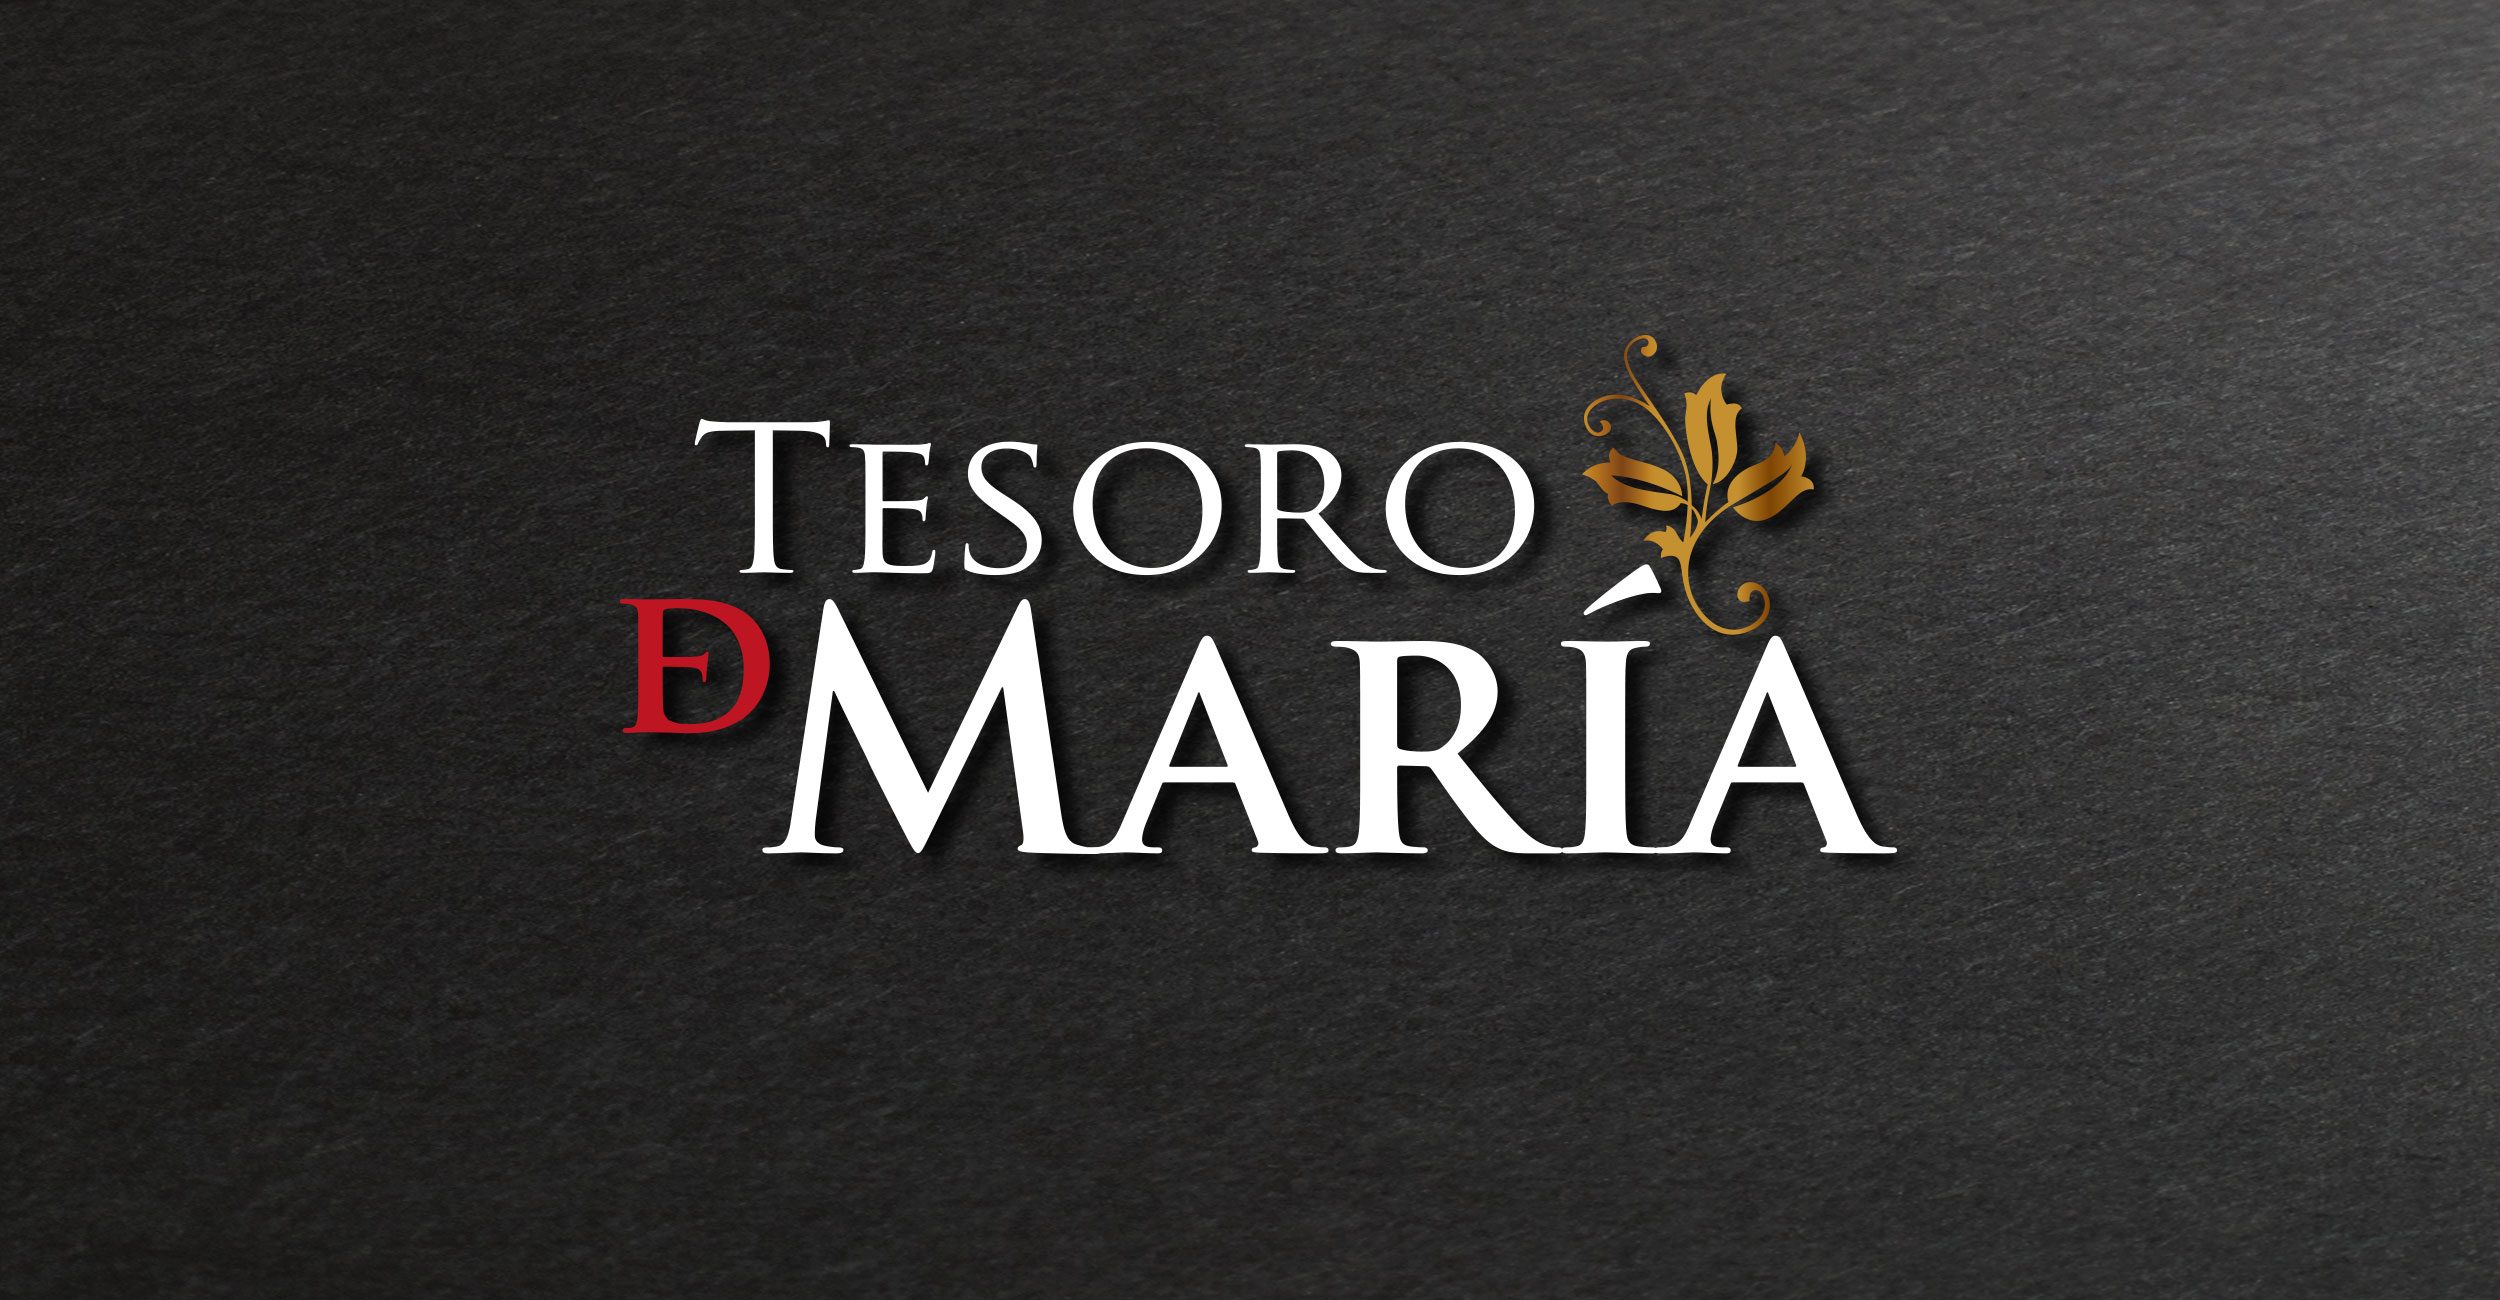 Portfolio of graphic and creative design works wine labels and packaging for Spanish wine cellar TESORO DE MARIA